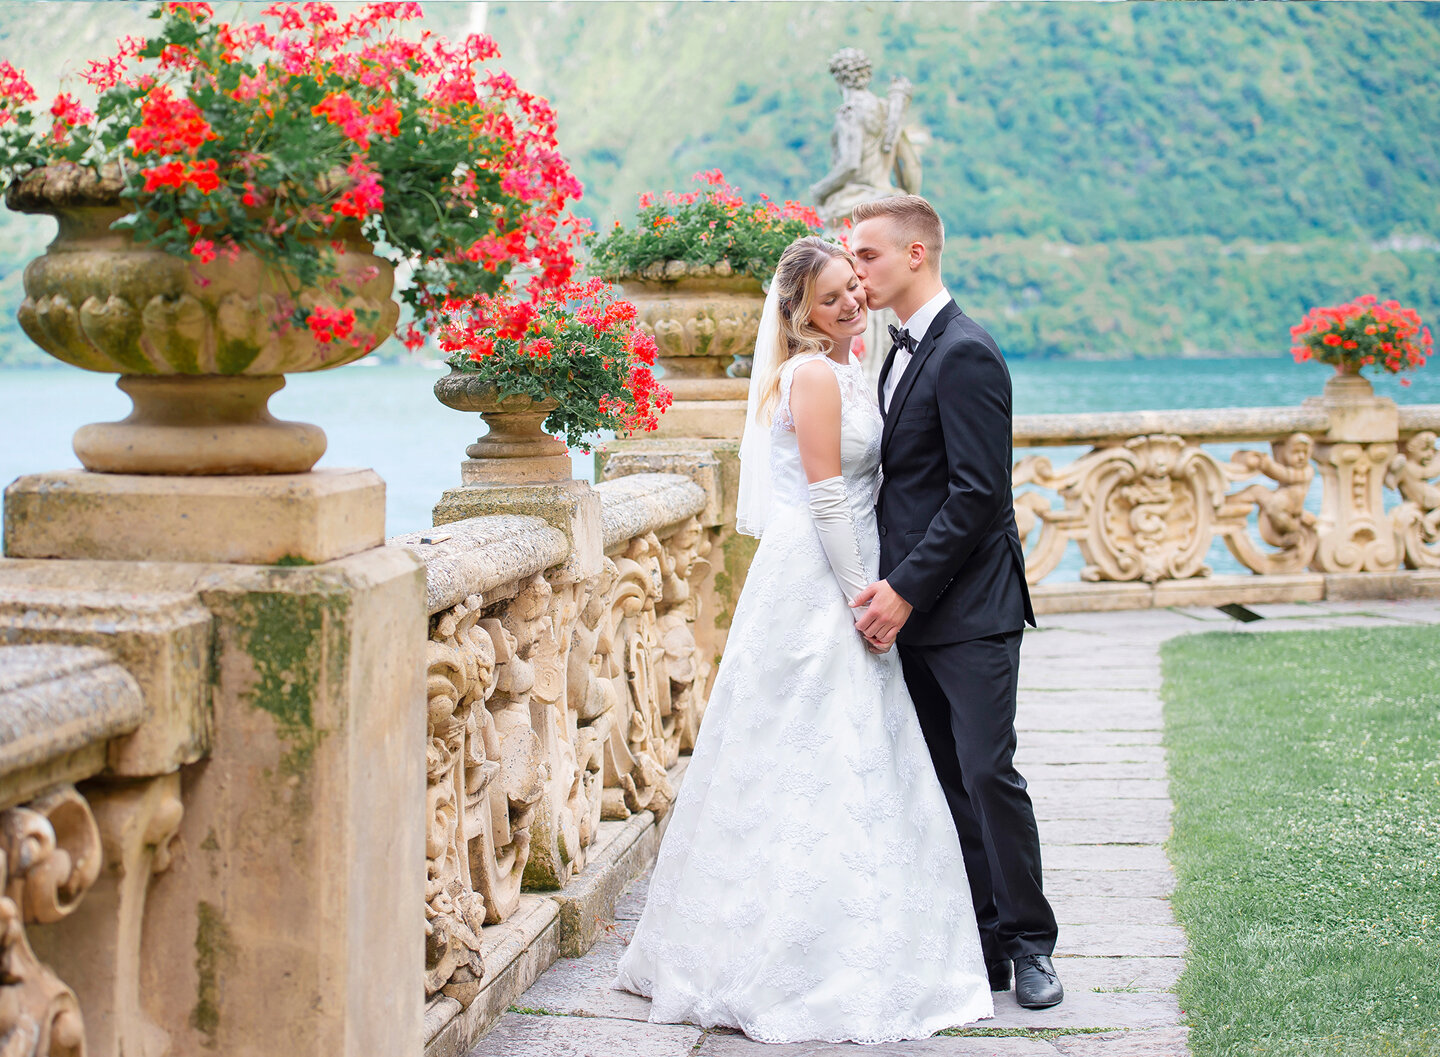 Lake Como elopement: bride, groom and terrace with red flowers